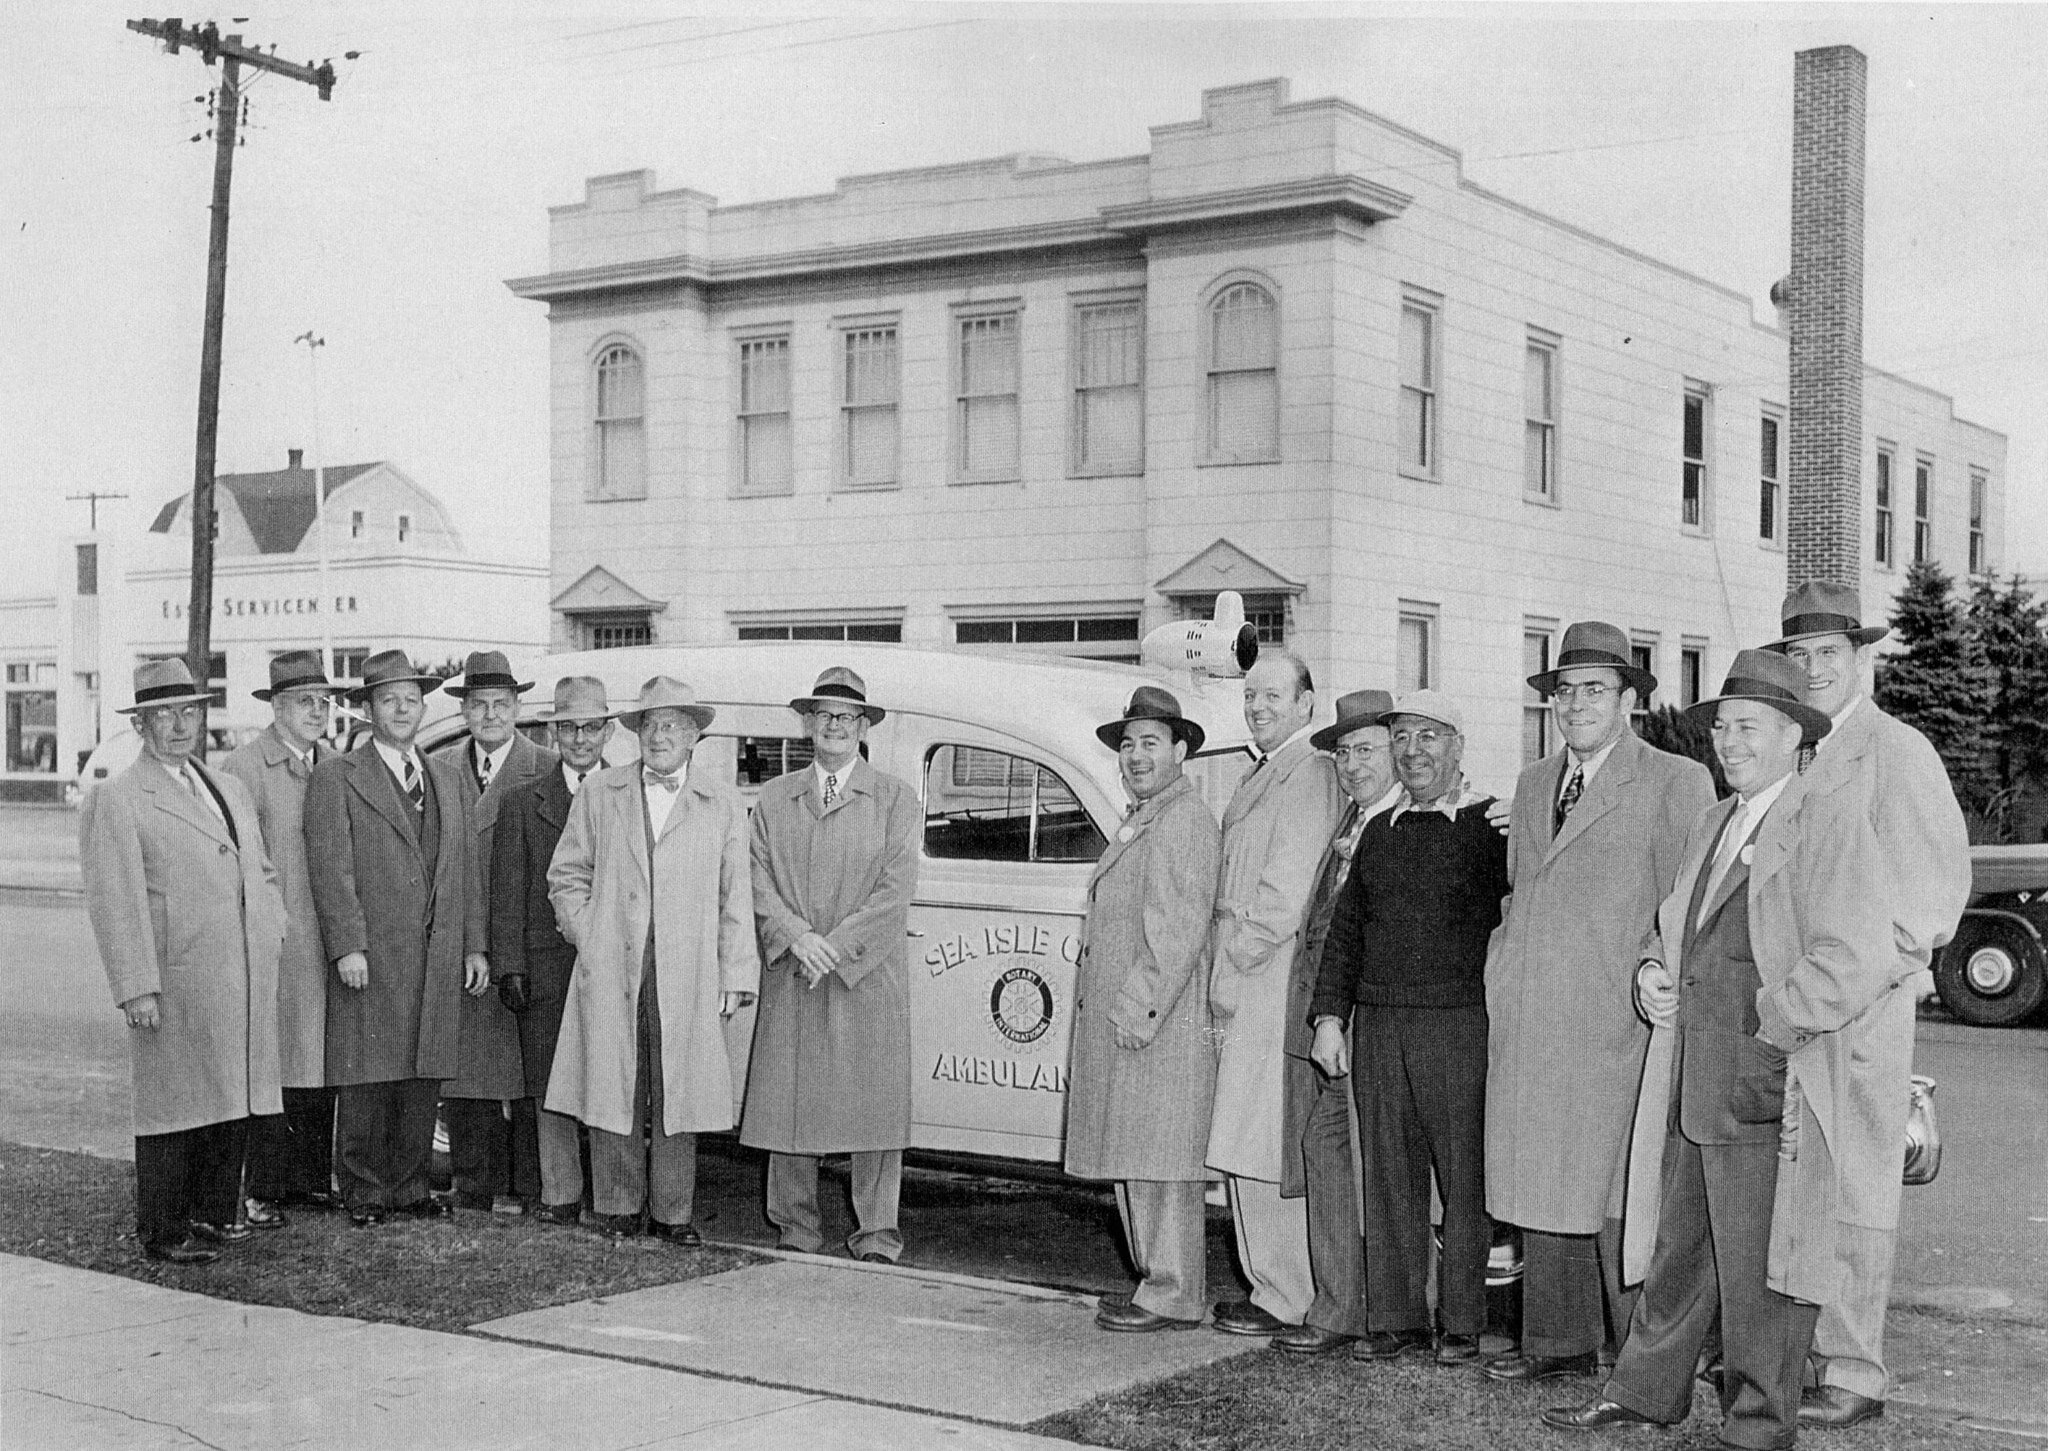  Doctors in Sea Isle City: from left, Dr. Frank Dealy, Adolph Wilsey, Willard Wright, Dr. Clarence Way, Reverend Sawn, George Souder, Claude Van Hook, Dom Raffa, Marty Van Hook, Irving Fitch, Tony Canuso, Ira Bushay, Art Laricks and Bill Haffert. 